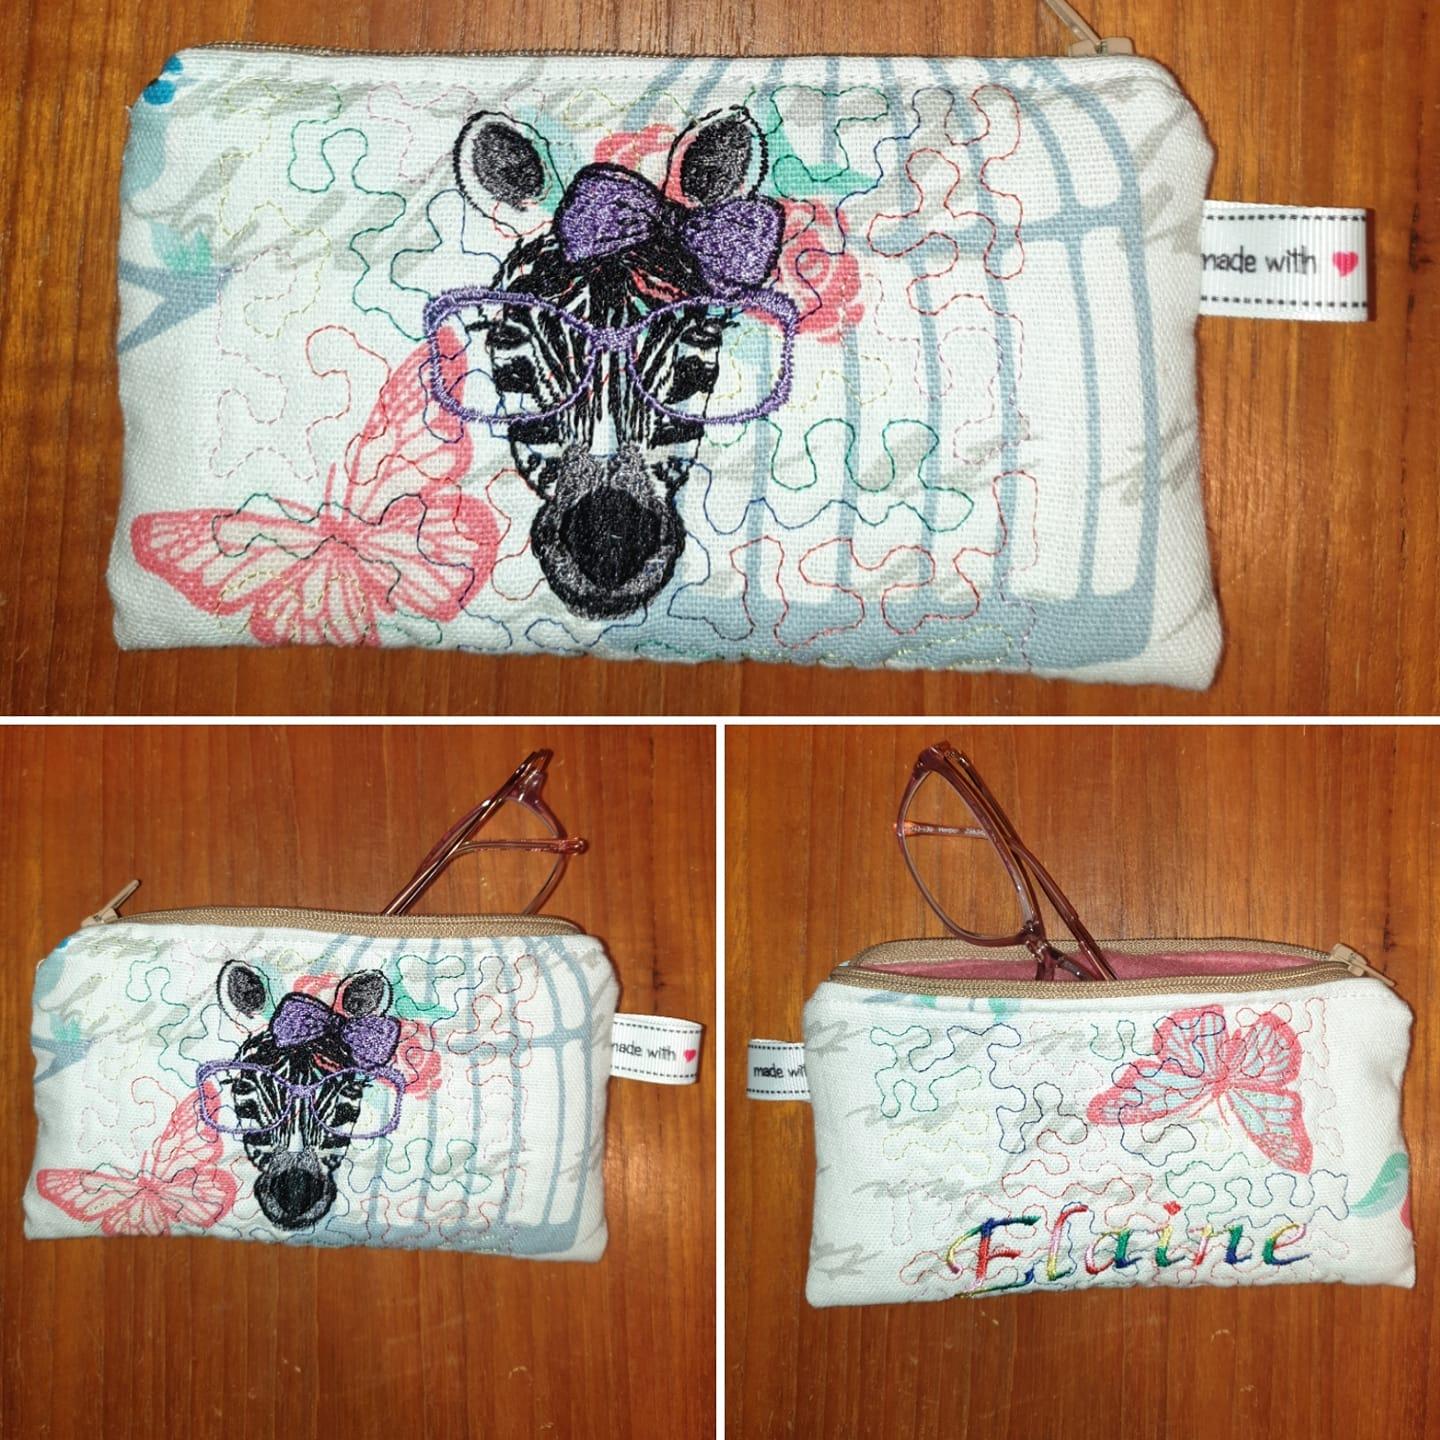 Crafting Cases with Stylish Zebra with Glasses Embroidery Design